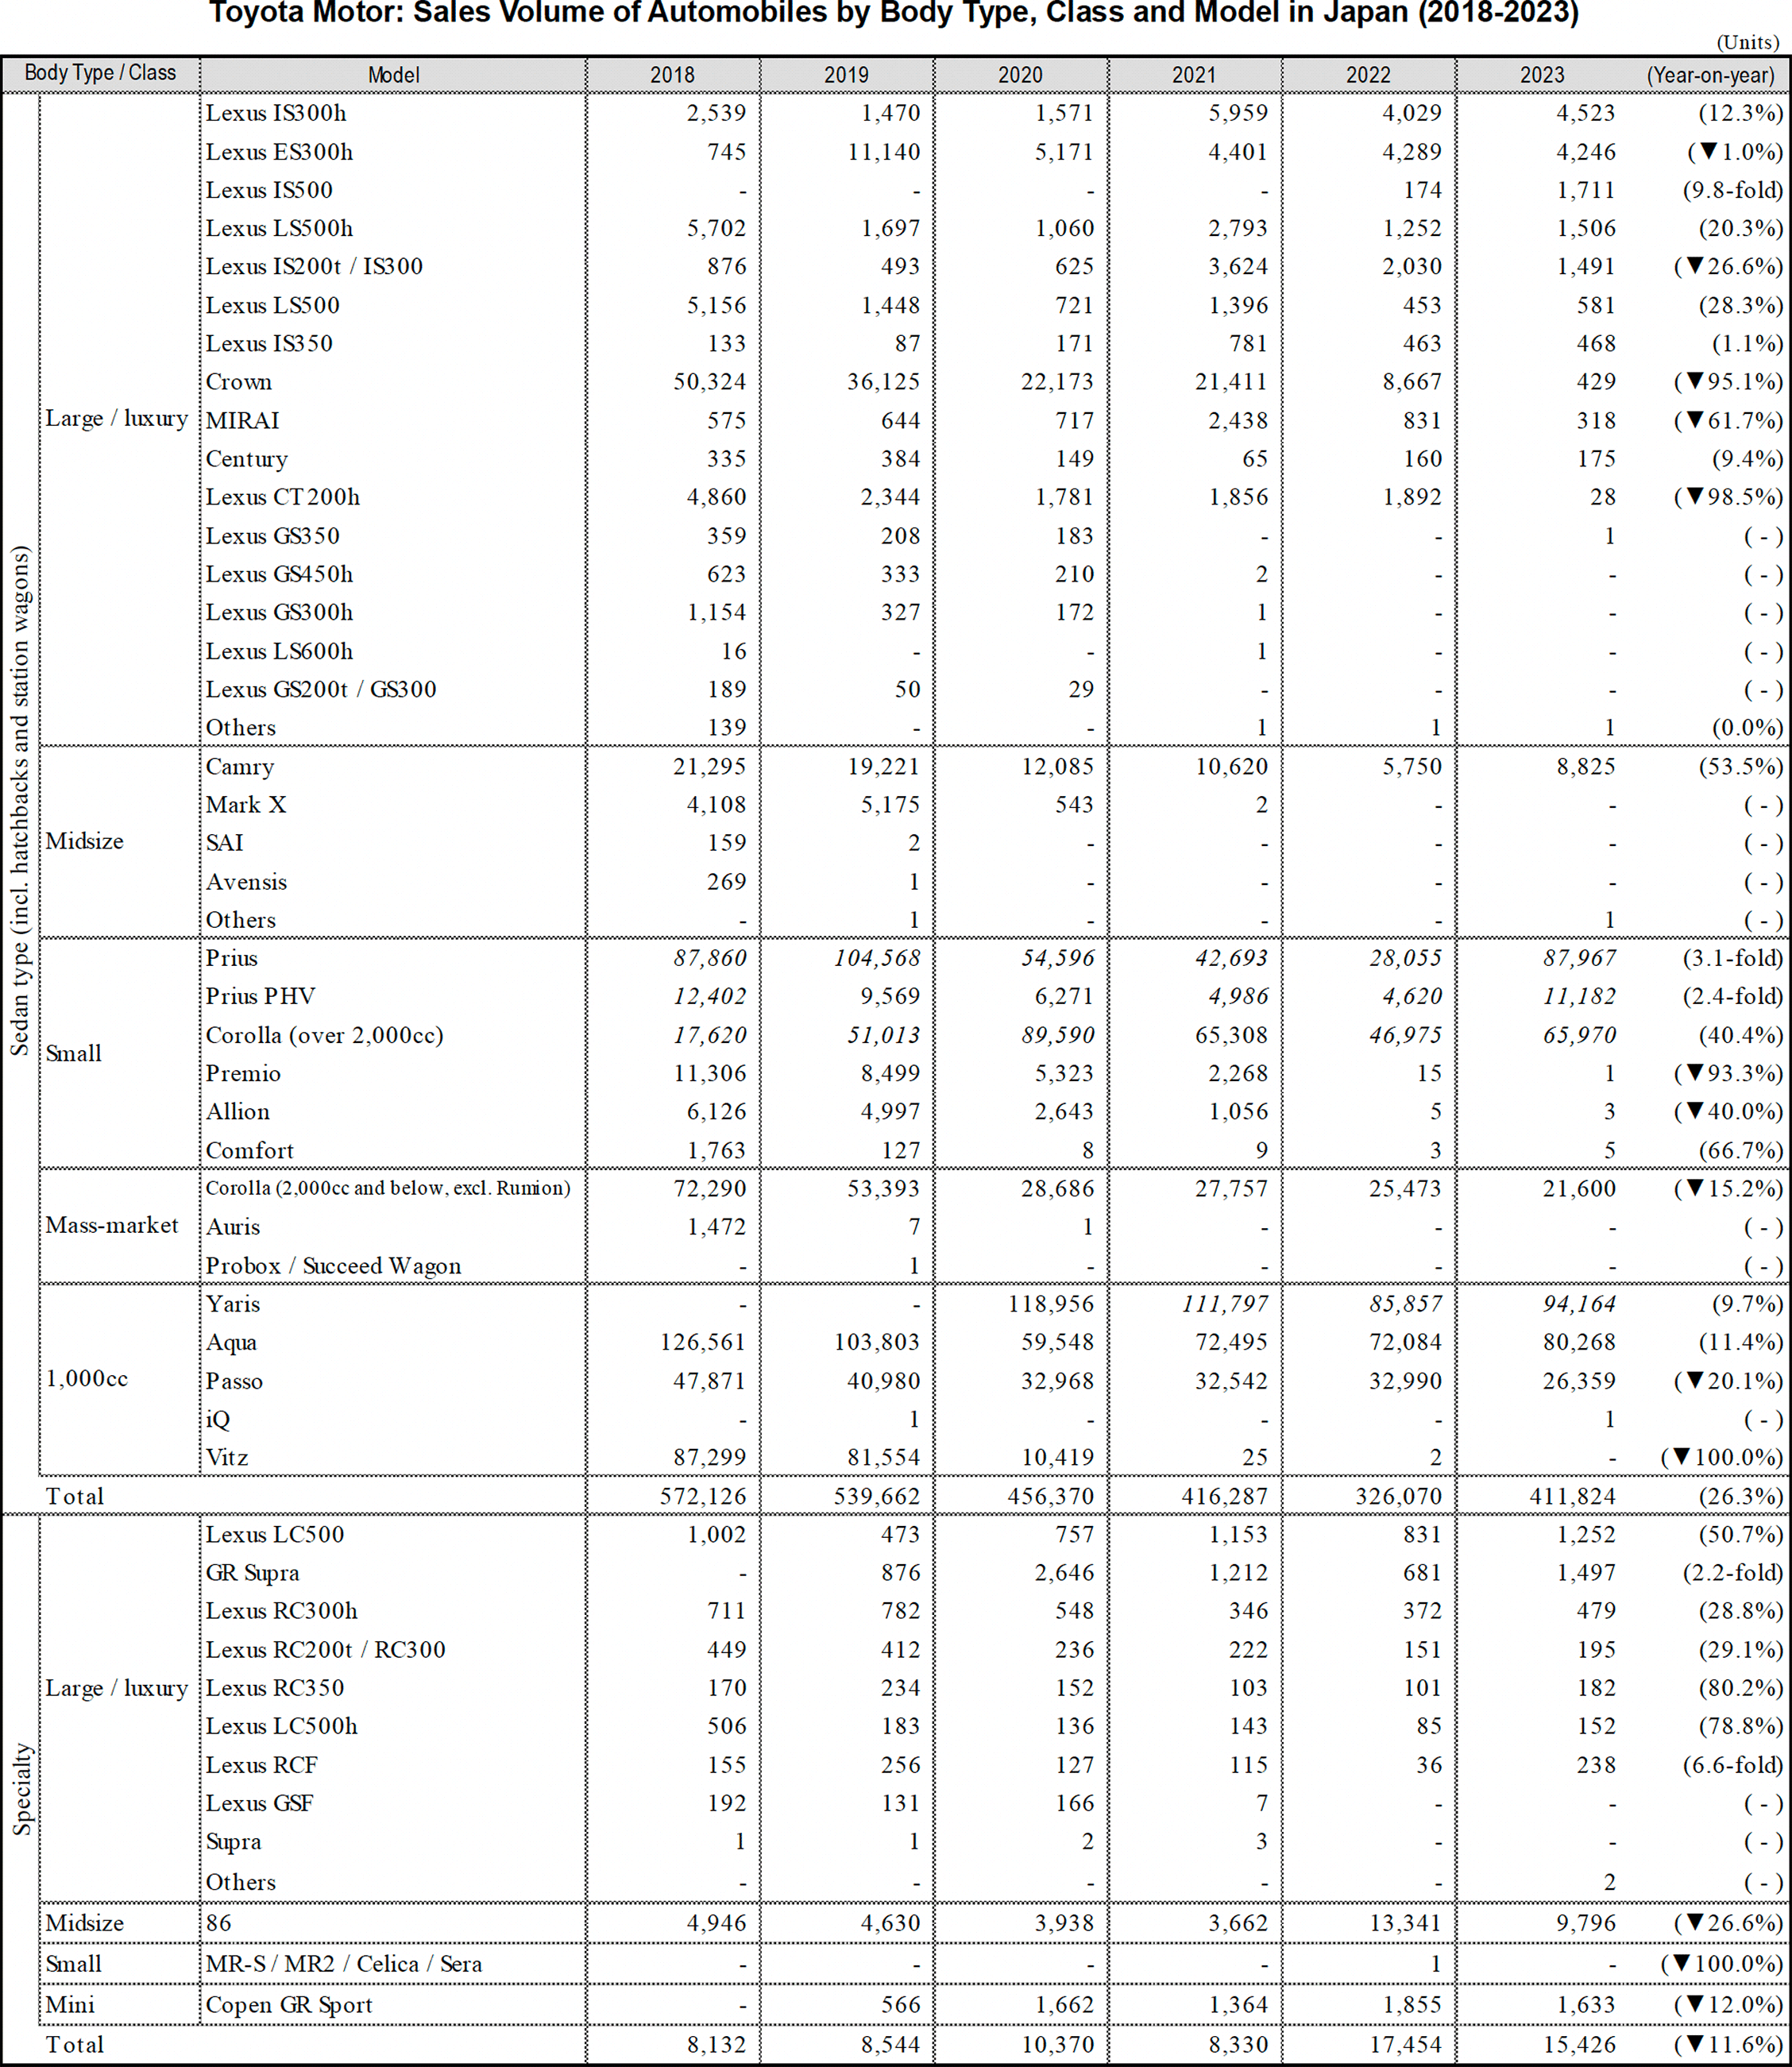 Table Data: Toyota Motor: Sales Volume of Automobiles by Body Type, Class and Model in Japan (2018-2023)